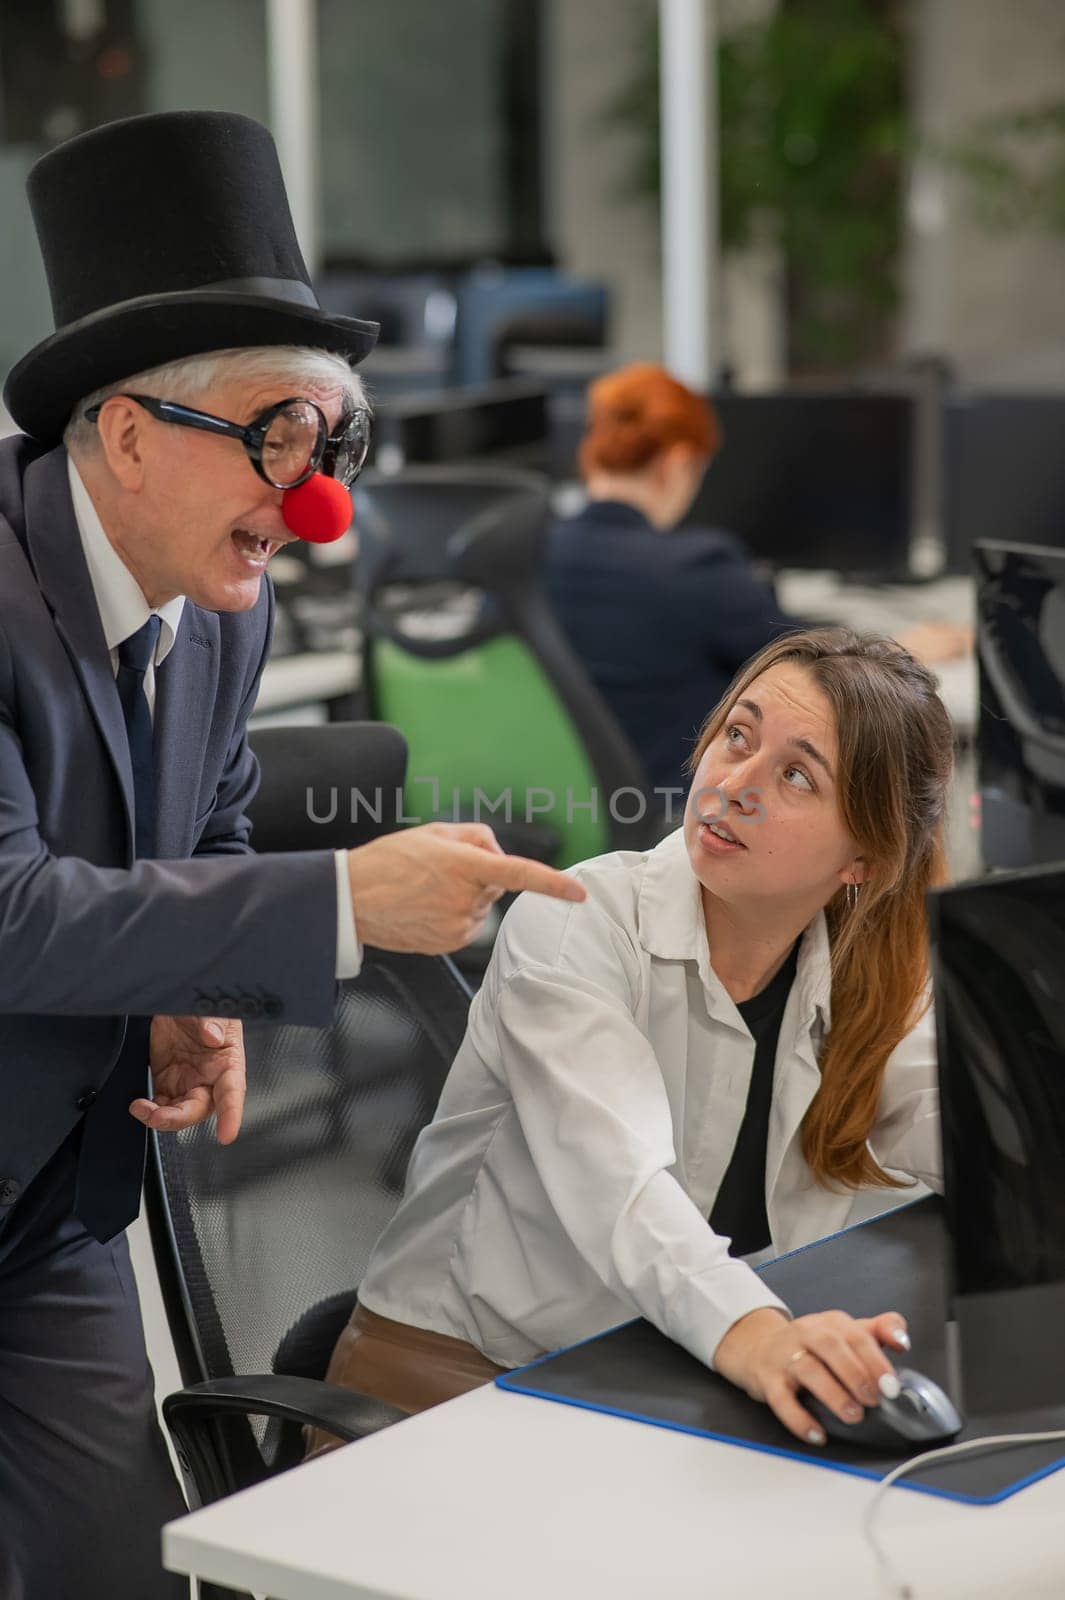 Caucasian woman communicates with an elderly man in a clown costume in the office. Vertical photo. by mrwed54